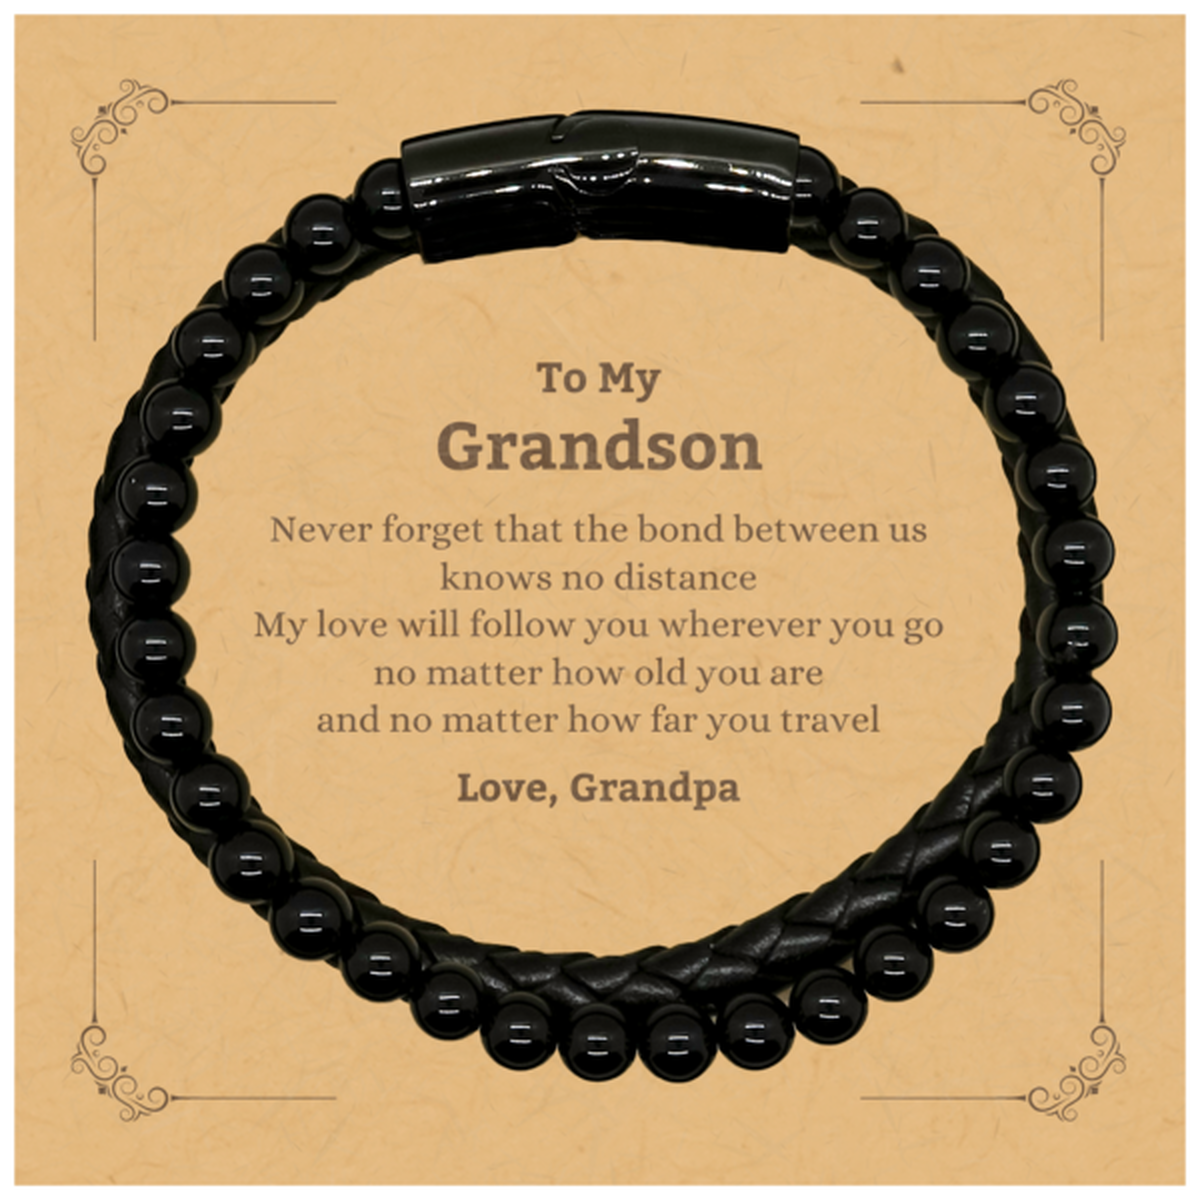 Grandson Birthday Gifts from Grandpa, Adjustable Stone Leather Bracelets for Grandson Christmas Graduation Unique Gifts Grandson Never forget that the bond between us knows no distance. Love, Grandpa